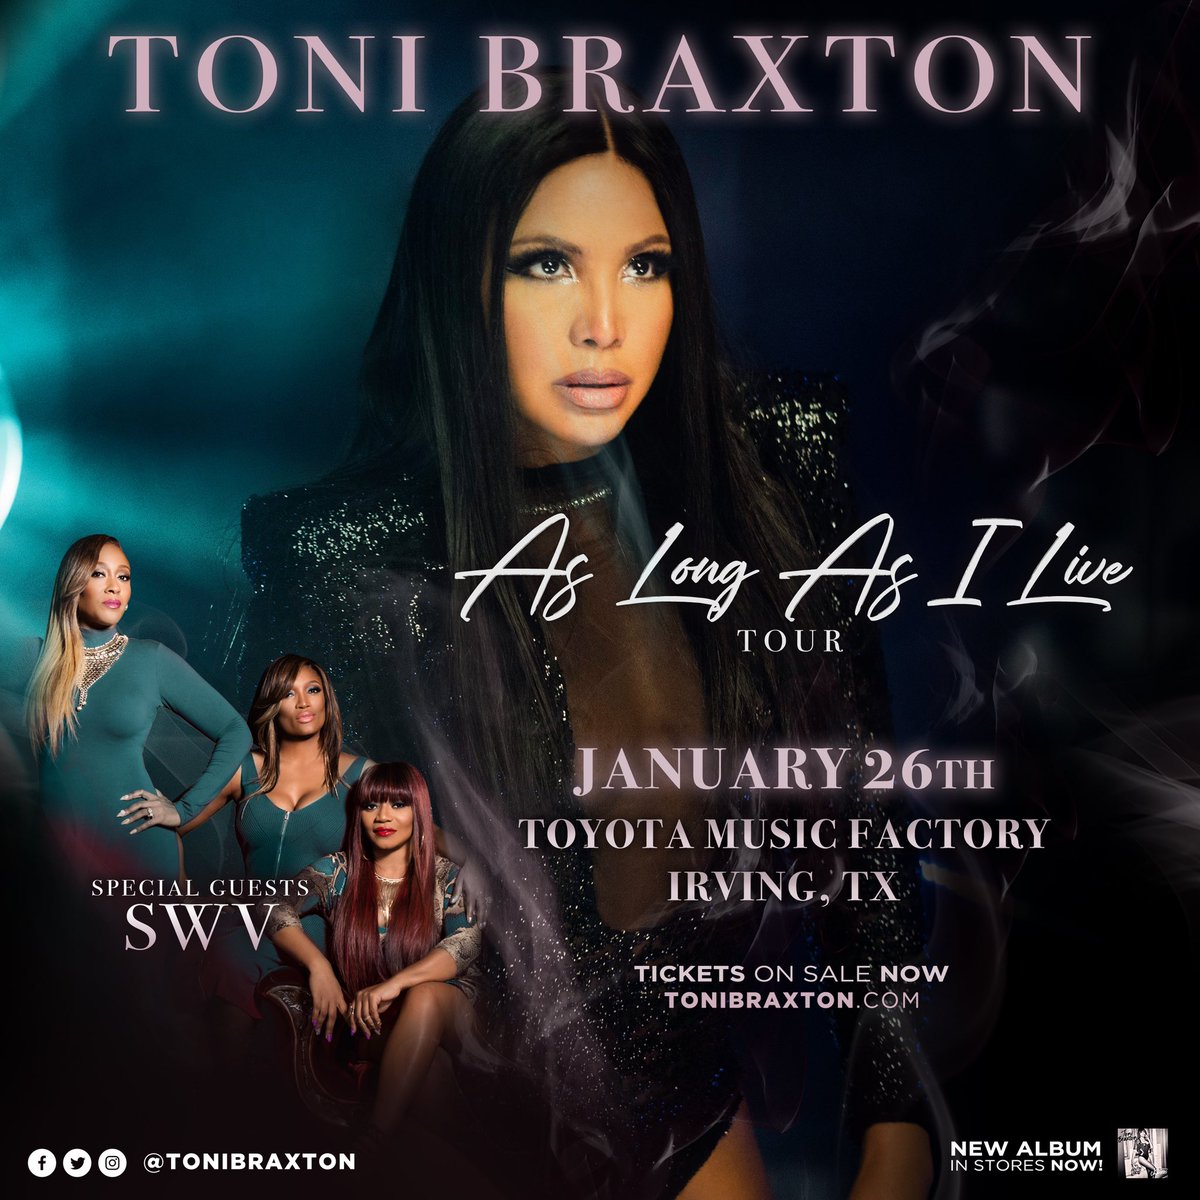 IRVING, TX! Me and my girls @THEREALSWV are ready for you! See you tonight! ????#AsLongAsILiveTour https://t.co/YKRp3p7cwk